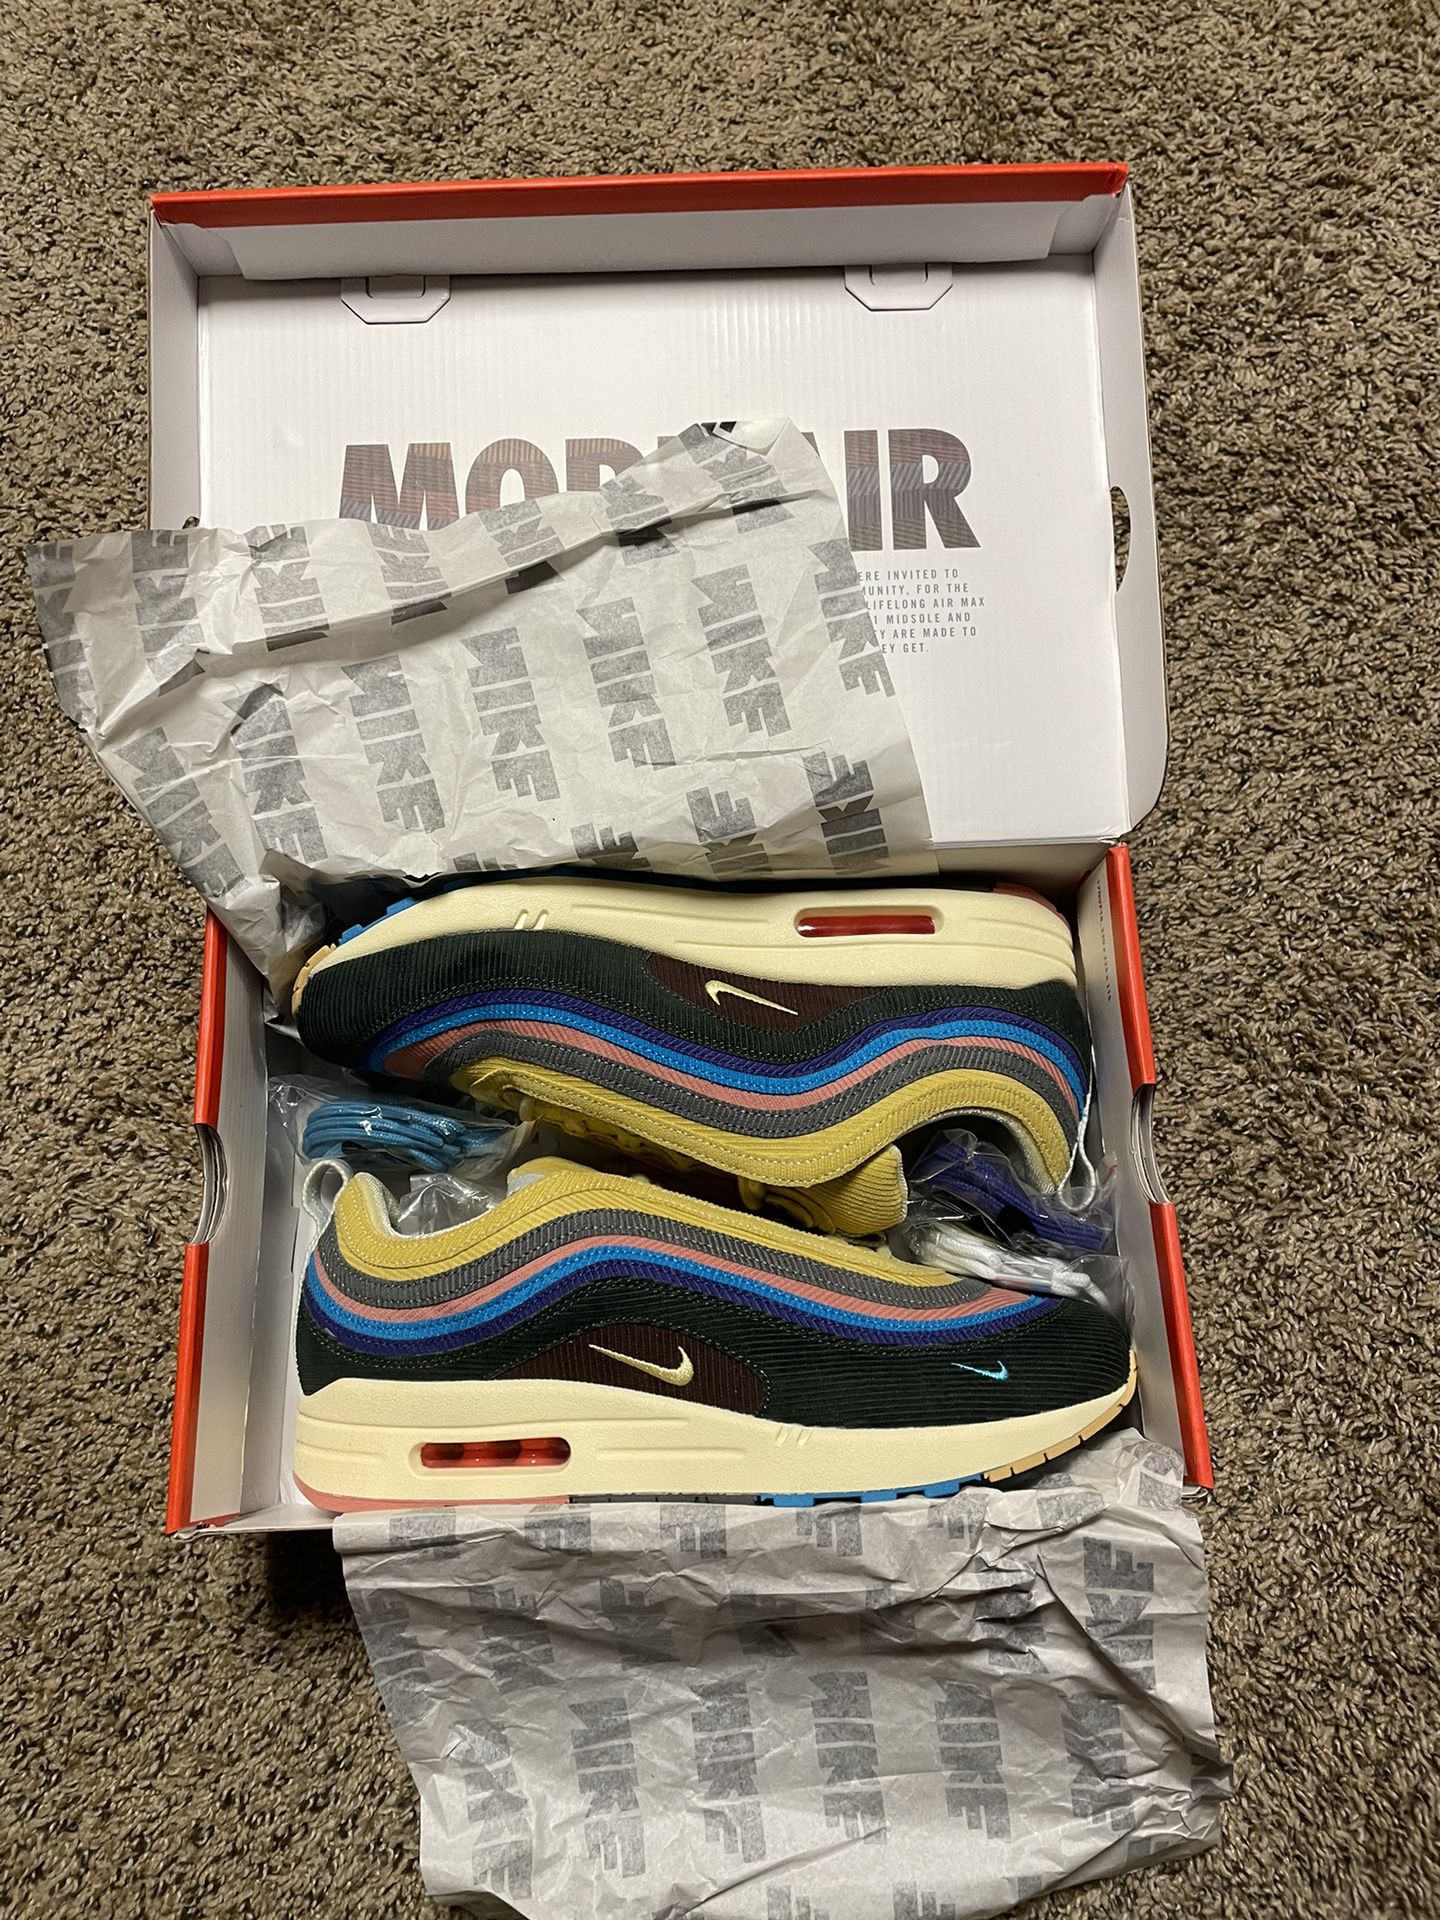 Sean Wotherspoon Air max 97